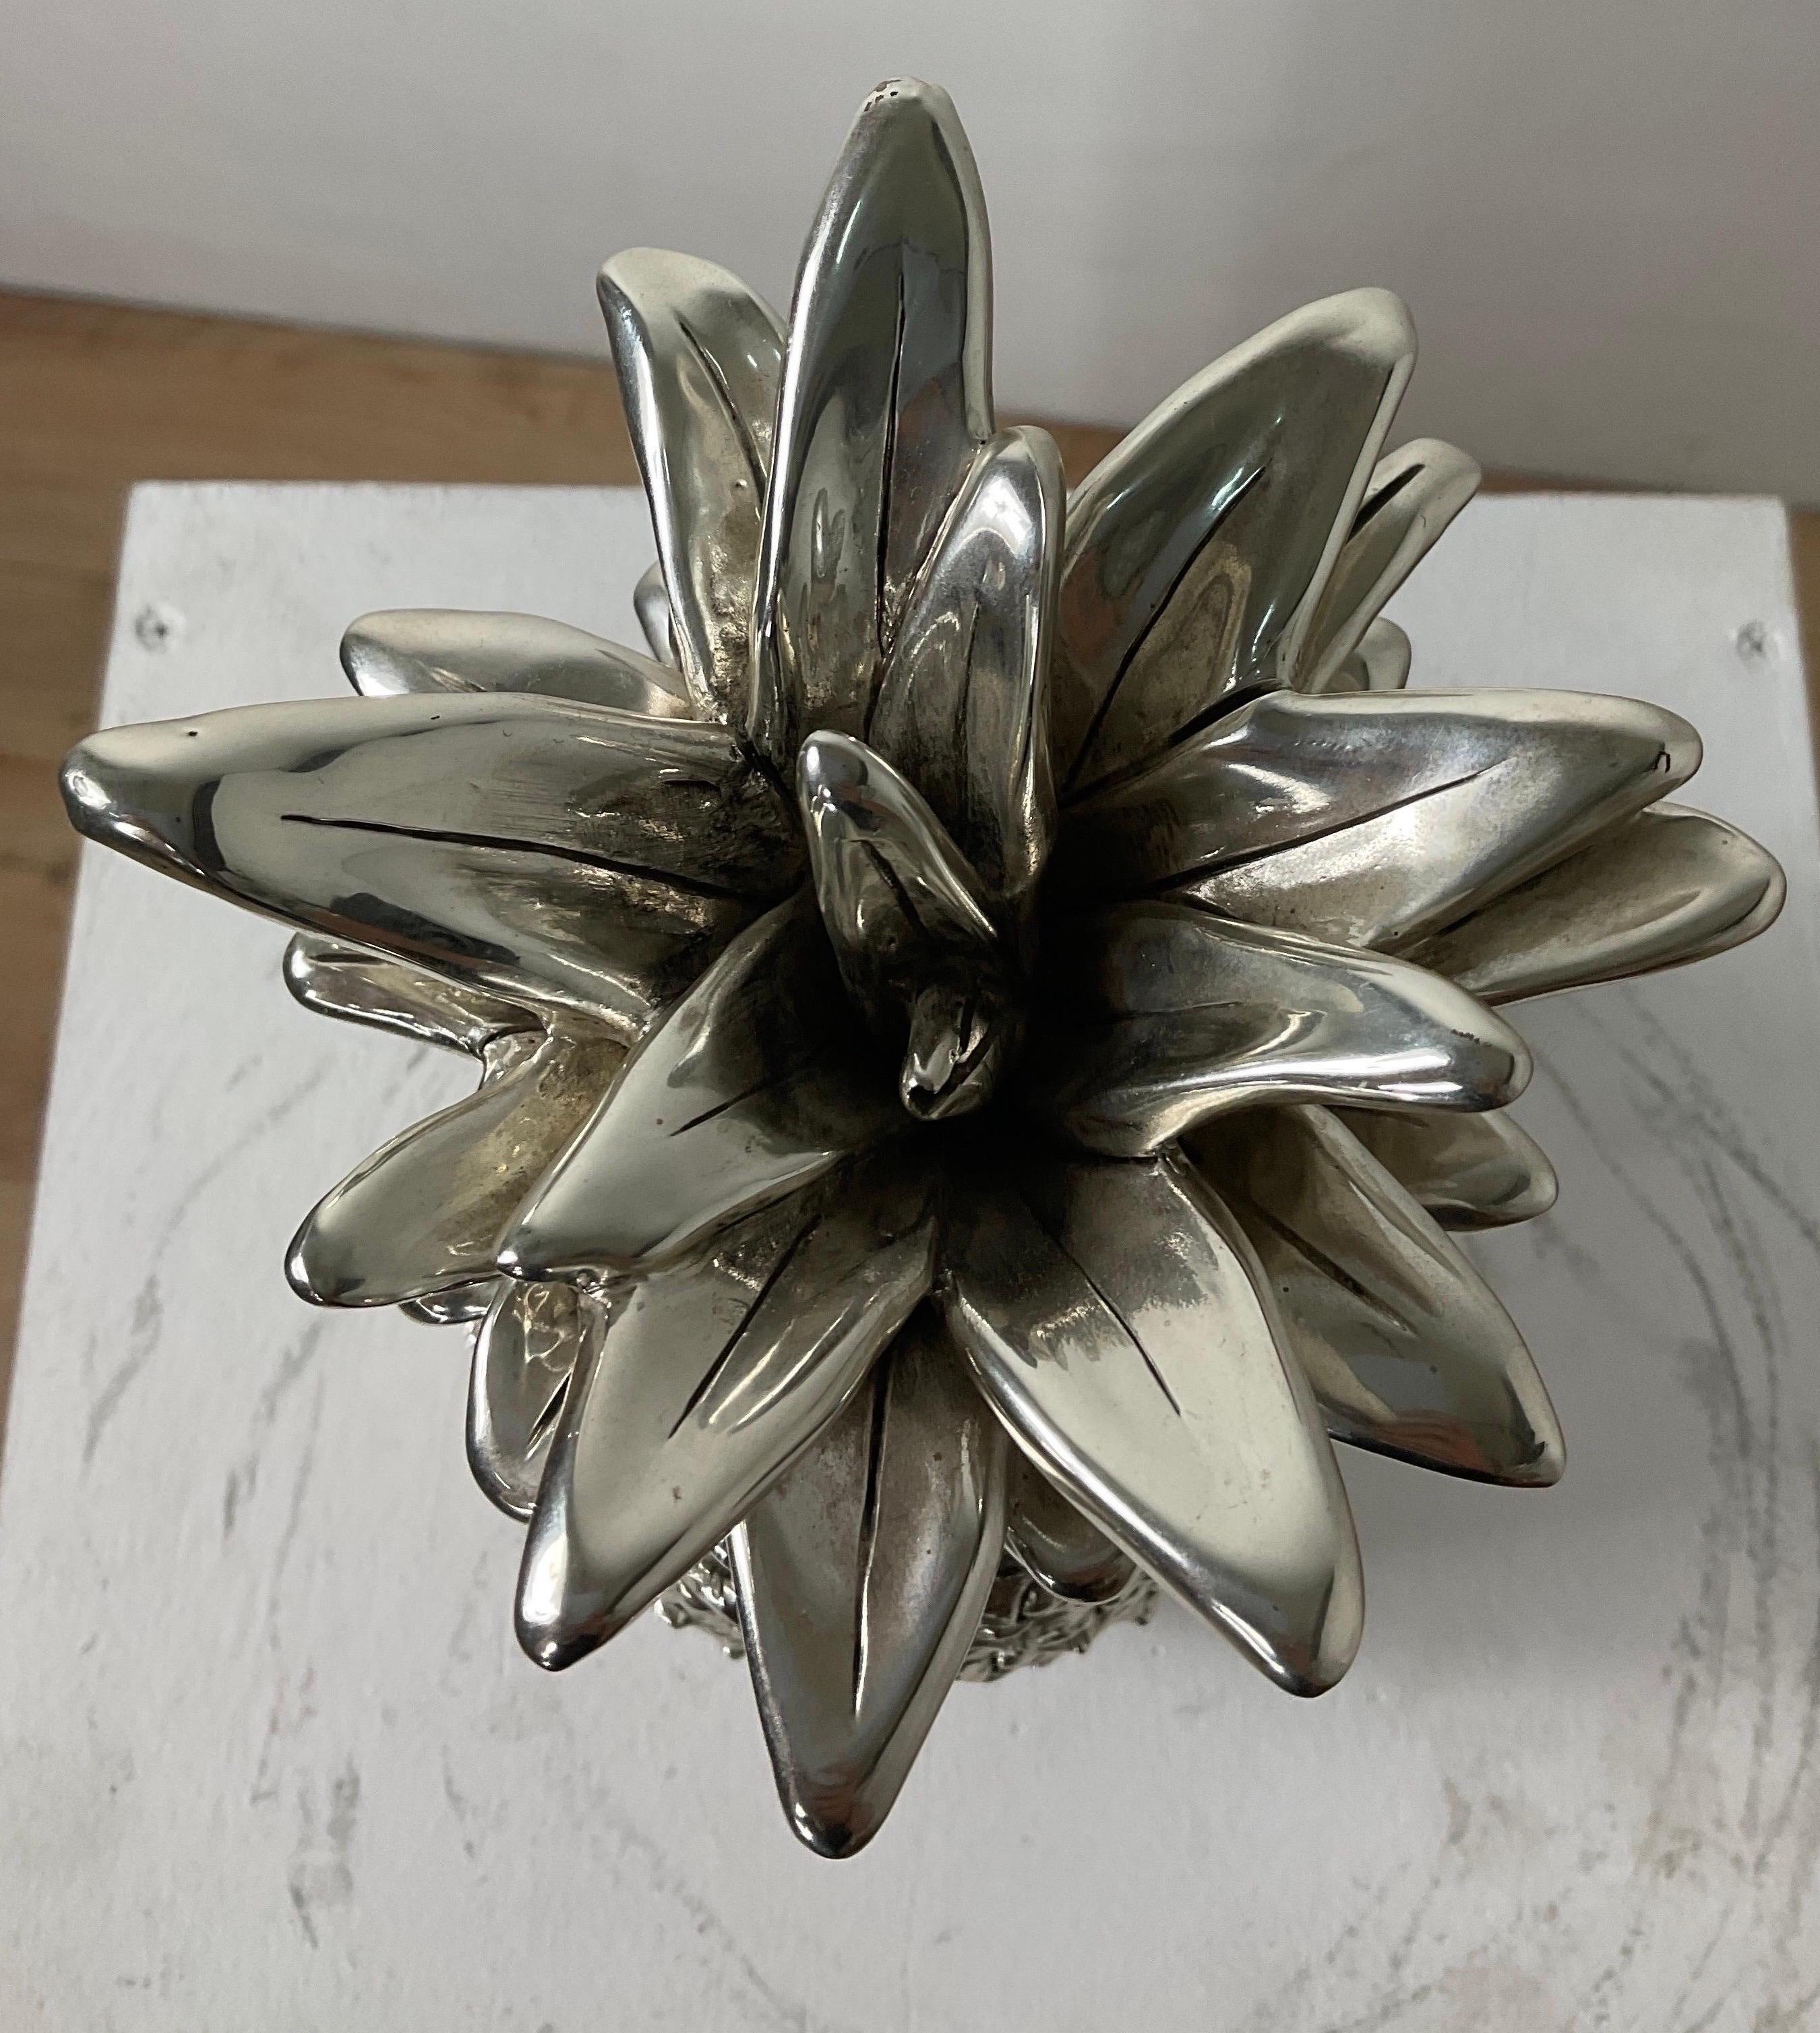 Marcello Giorgio's Silver Laminated Large Italian Pineapple from the Middle For Sale 7